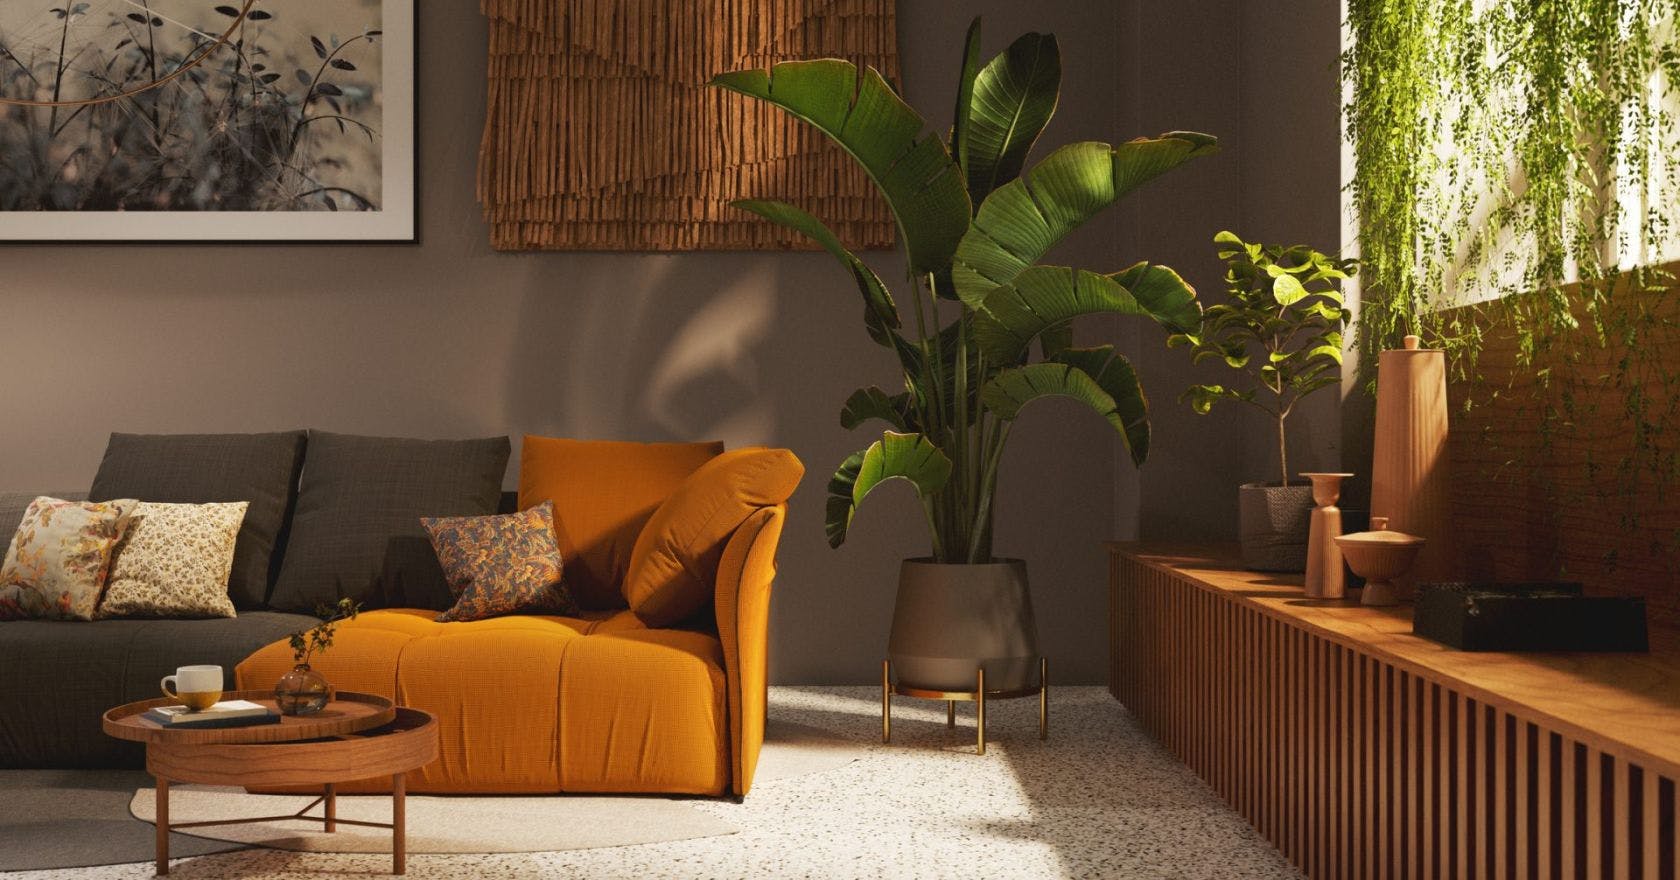 Forestcore is the nature-inspired decor trend to watch in 2023